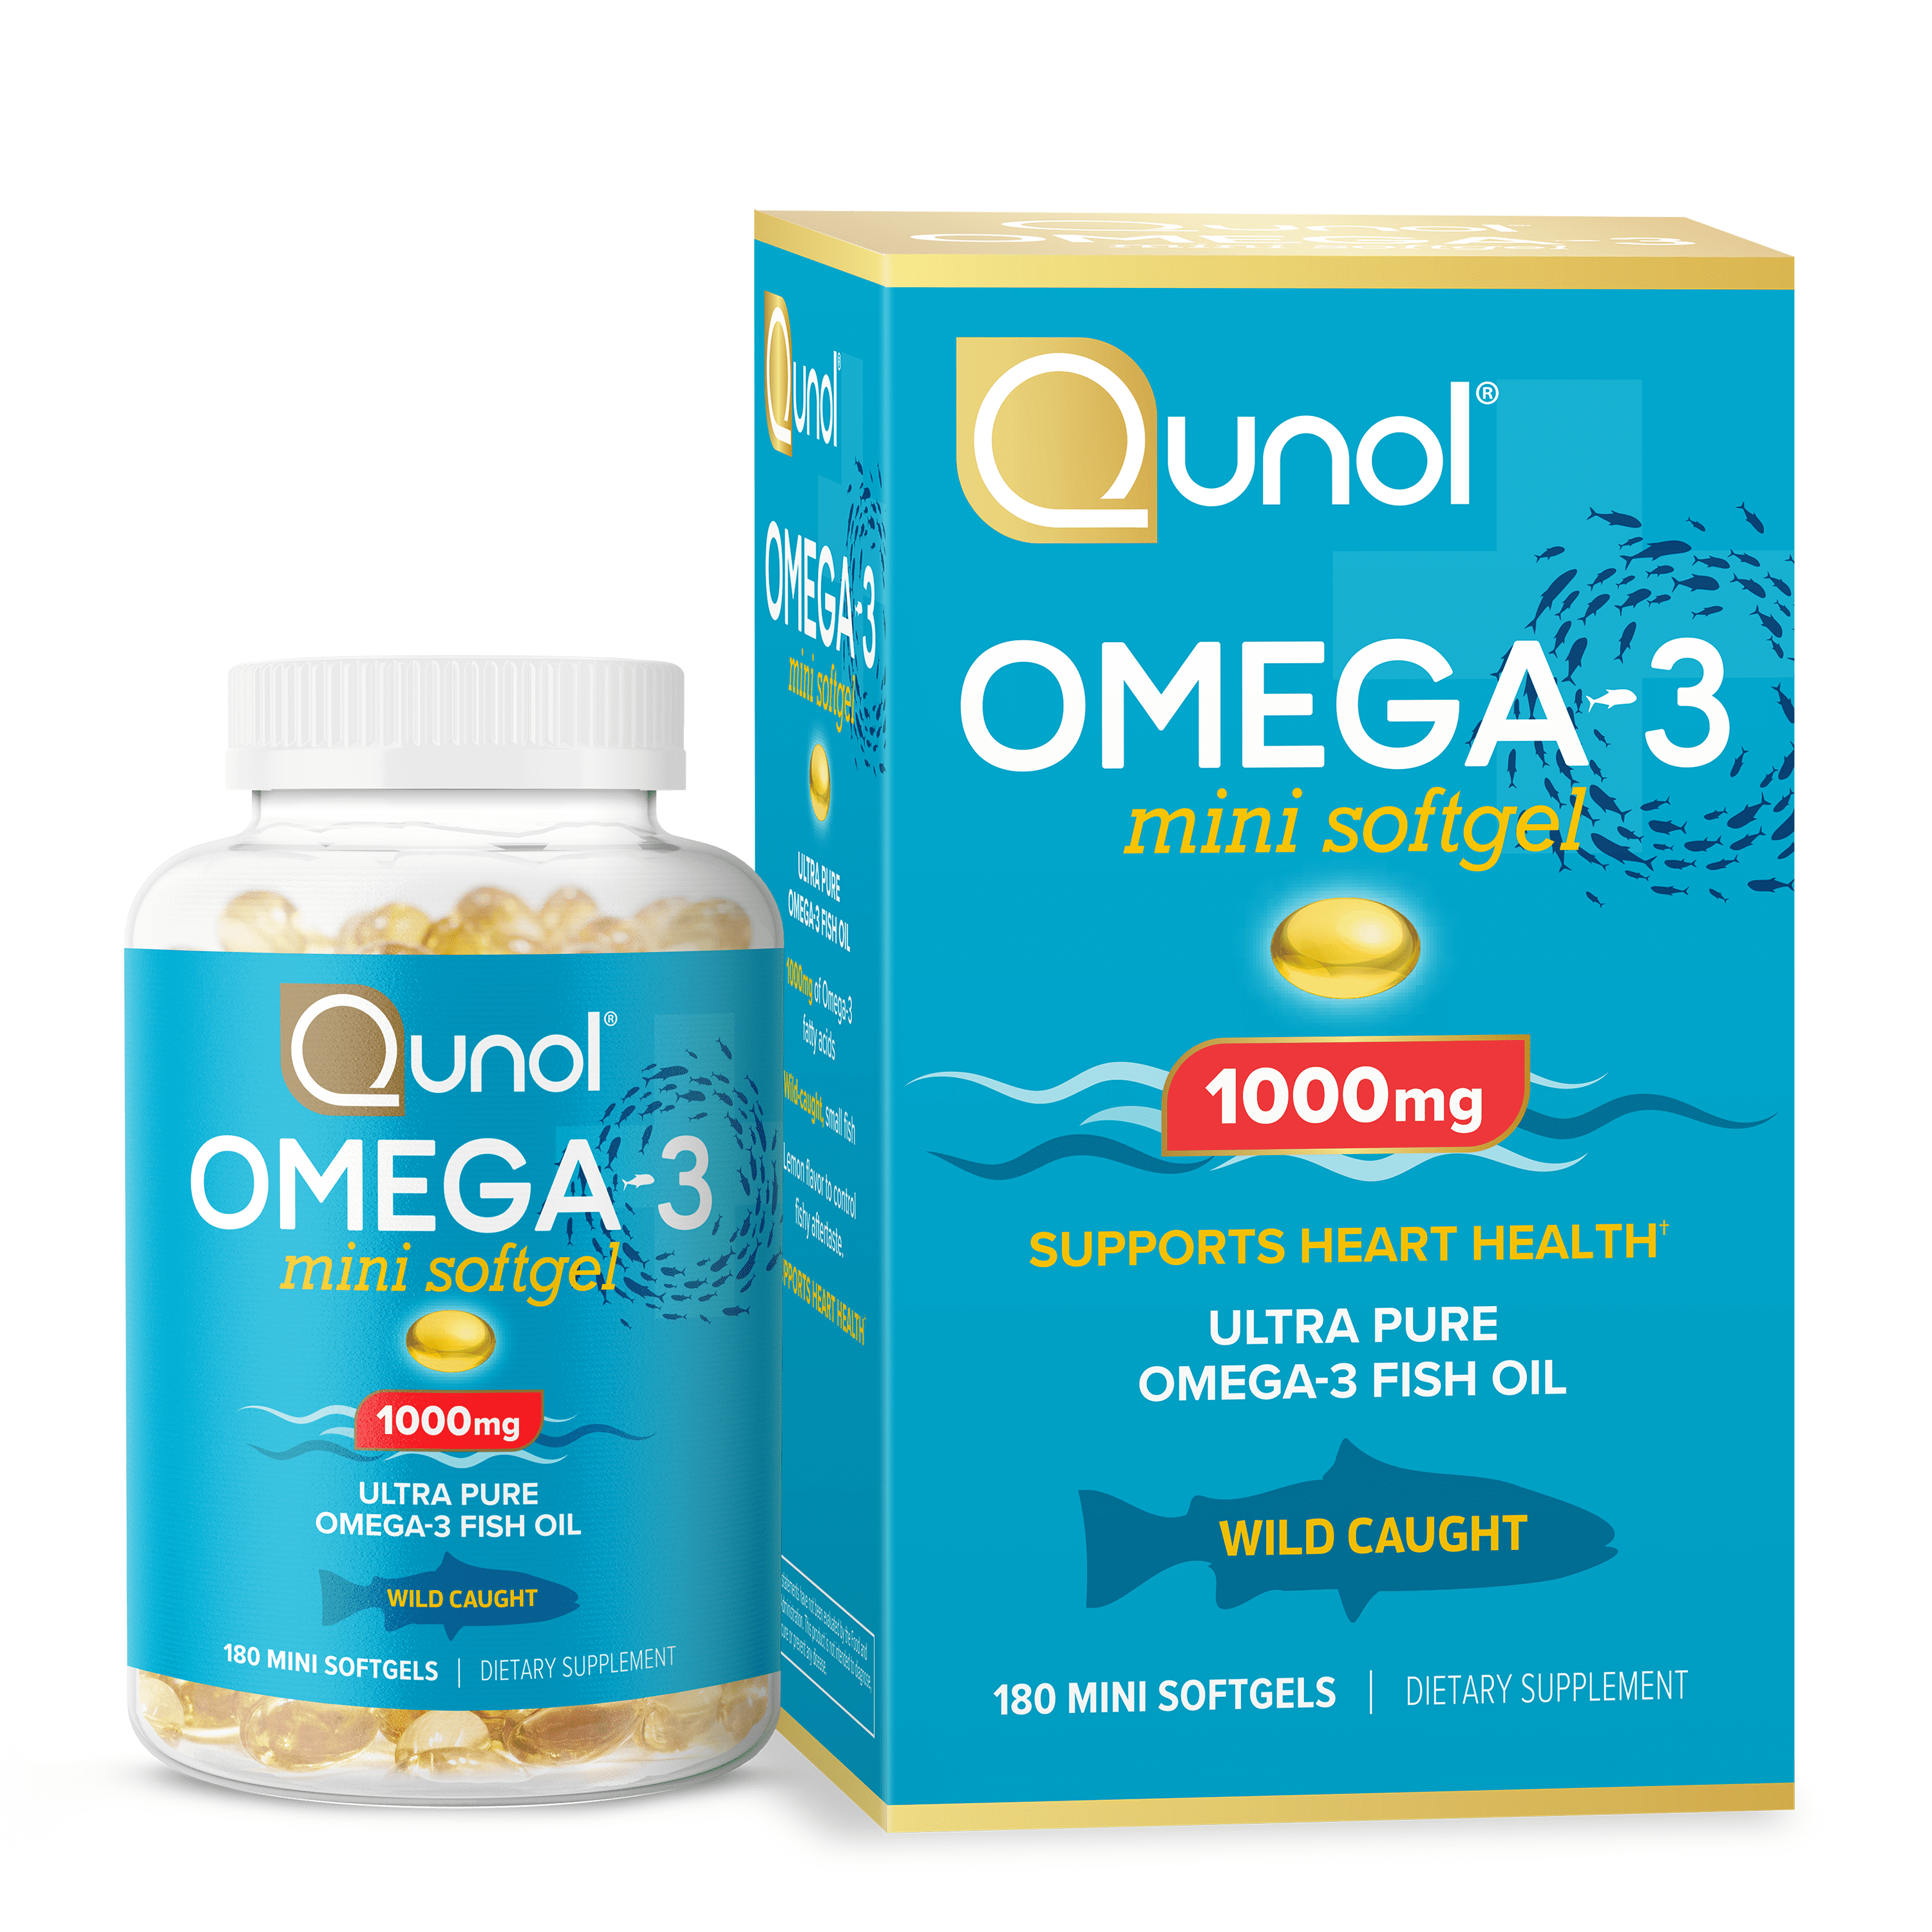 Qunol Mini Omega-3 Fish Oil Supplement (180 count) Heart Health Support with 1000mg Wild Caught Omega-3 Fatty Acids (Including EPA & DHA)